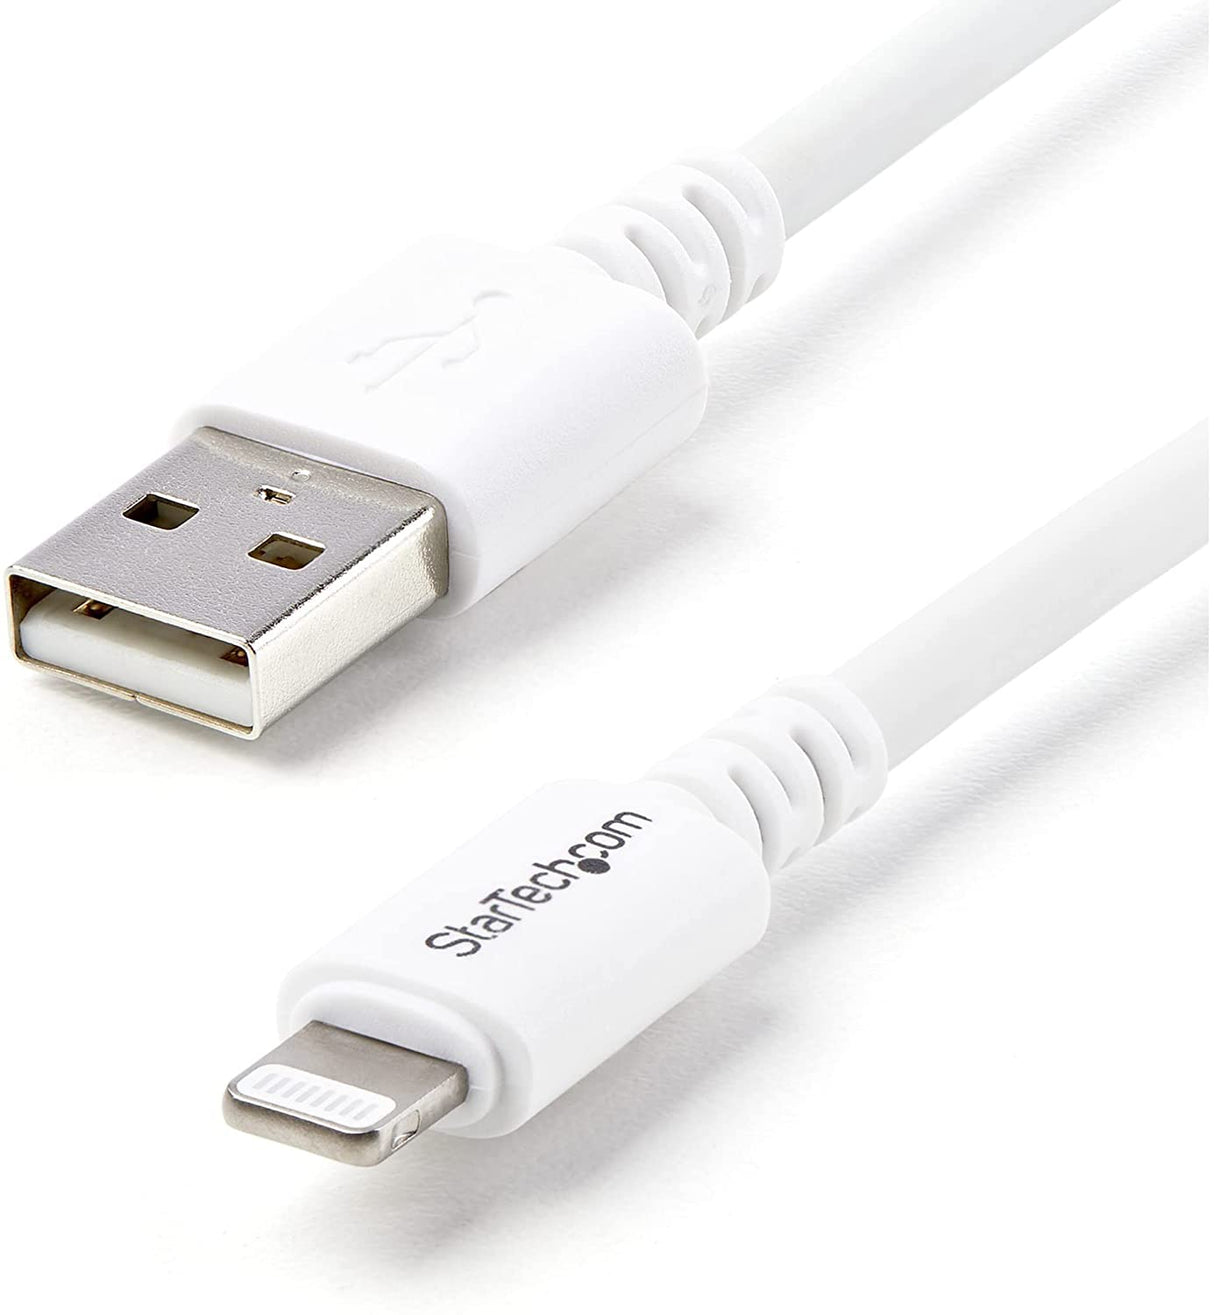 StarTech.com 3m (10ft) Long White Apple 8-pin Lightning Connector to USB Cable for iPhone / iPod / iPad - Charge and Sync Cable (USBLT3MW) 10ft White